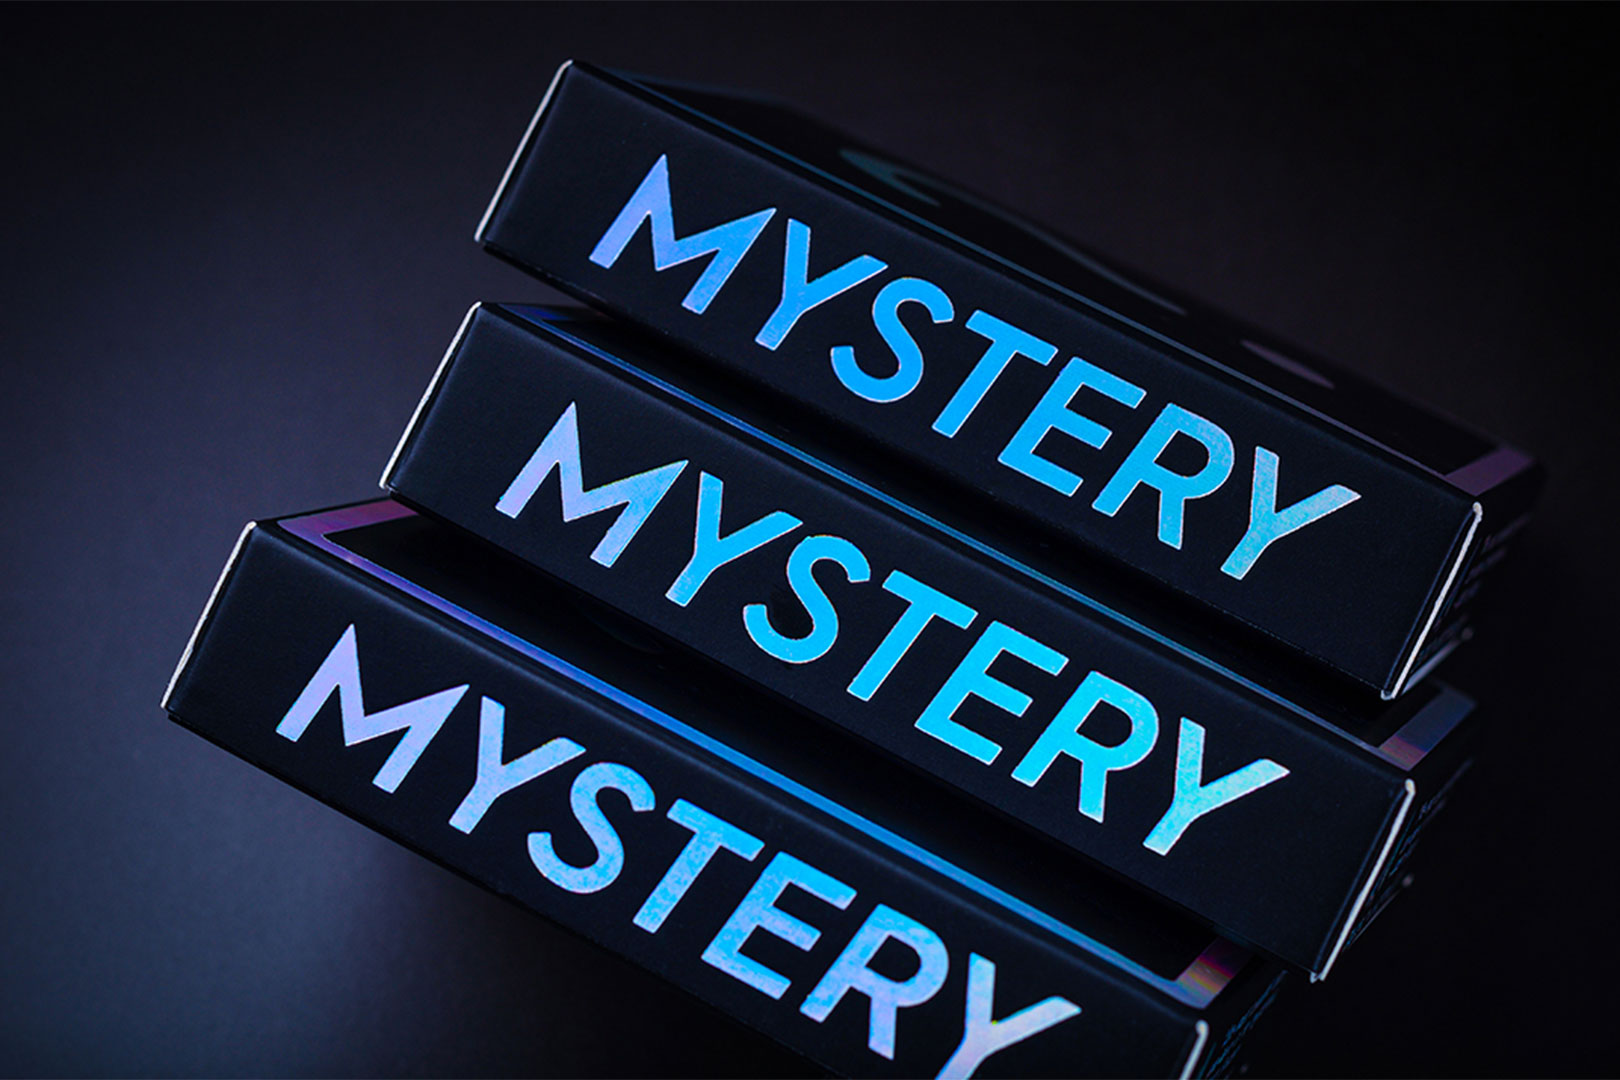 Cardvo Mystery Deck - The perfect starter gift!